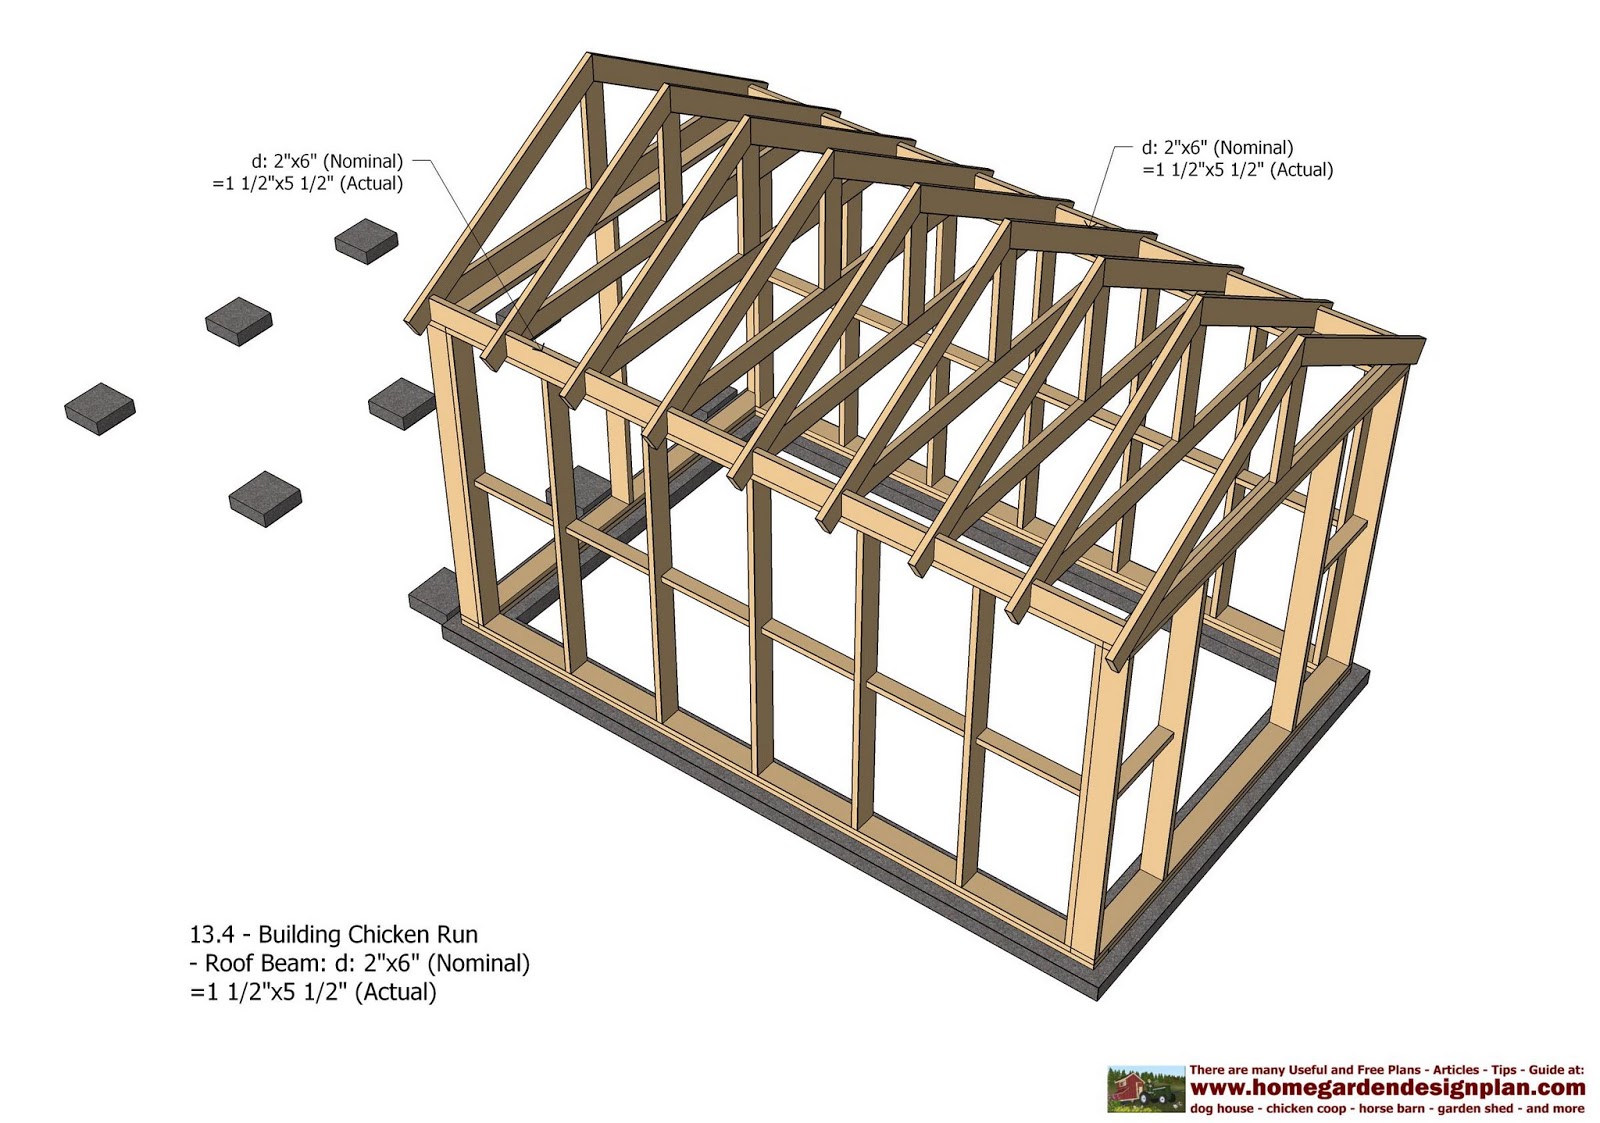  Shed Plans - Chicken Coop Plans - Storage Shed Plans Construction